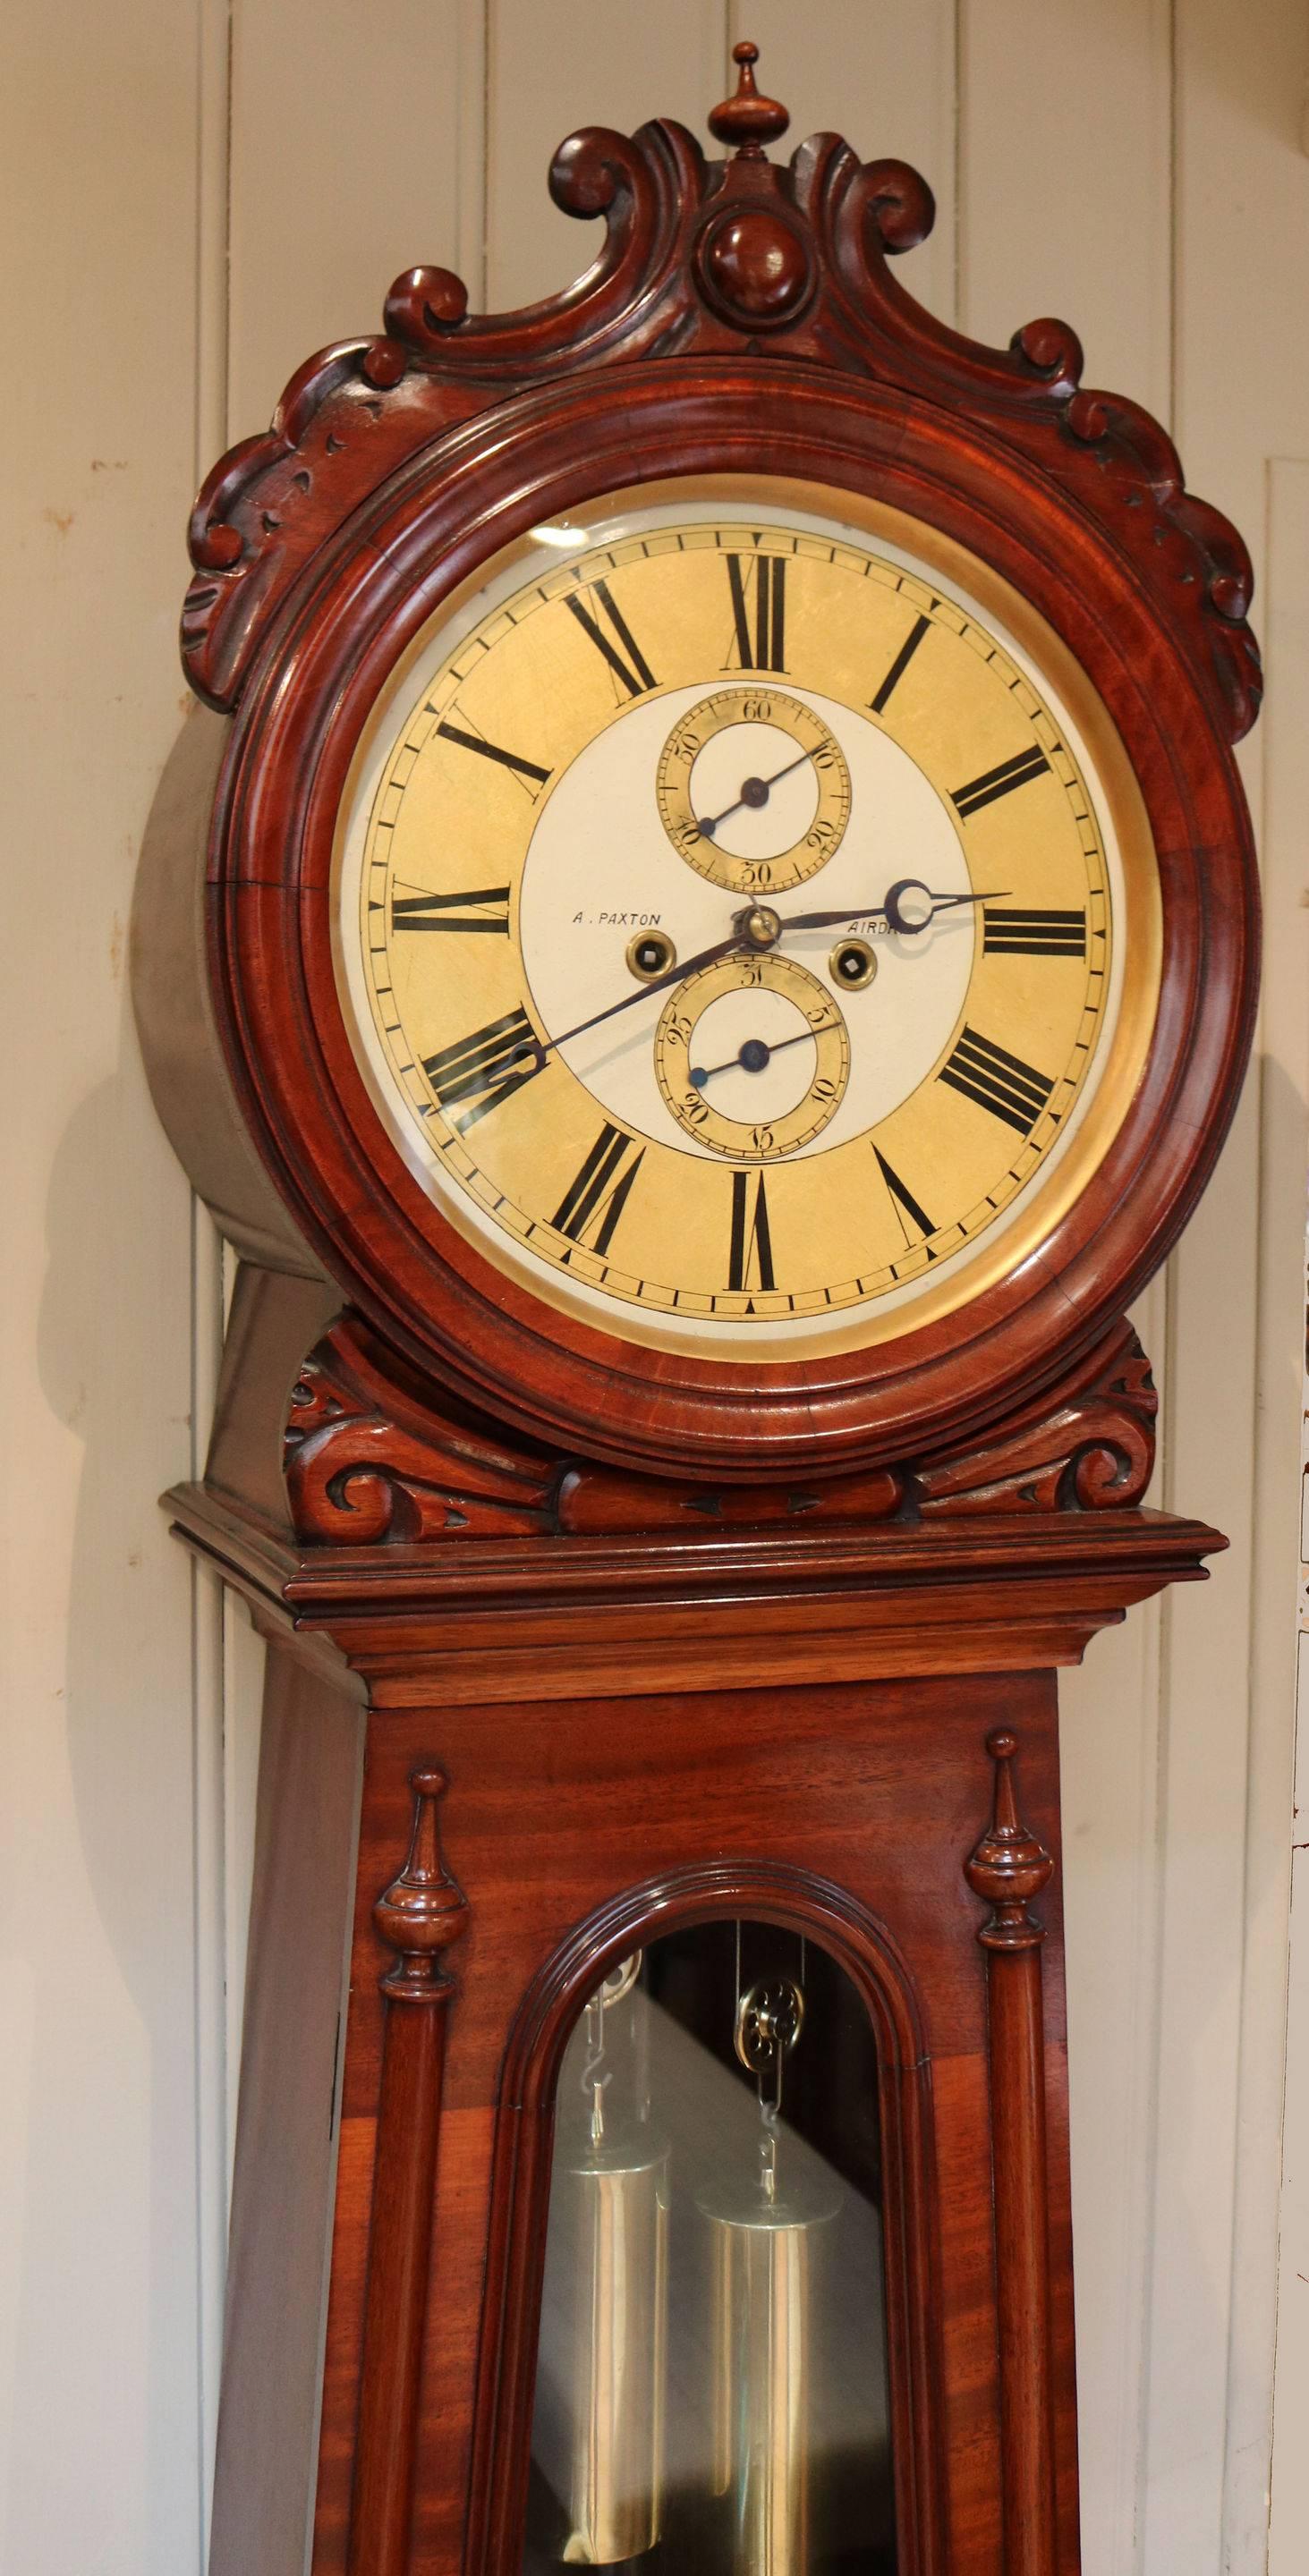 An attractive mid-19th century mahogany longcase clock, of a typical Scottish drumhead form. The case has a circular hood with a carved cresting and a long glazed door and a bombe shaped base. Visible within the door are the brass weights and wood